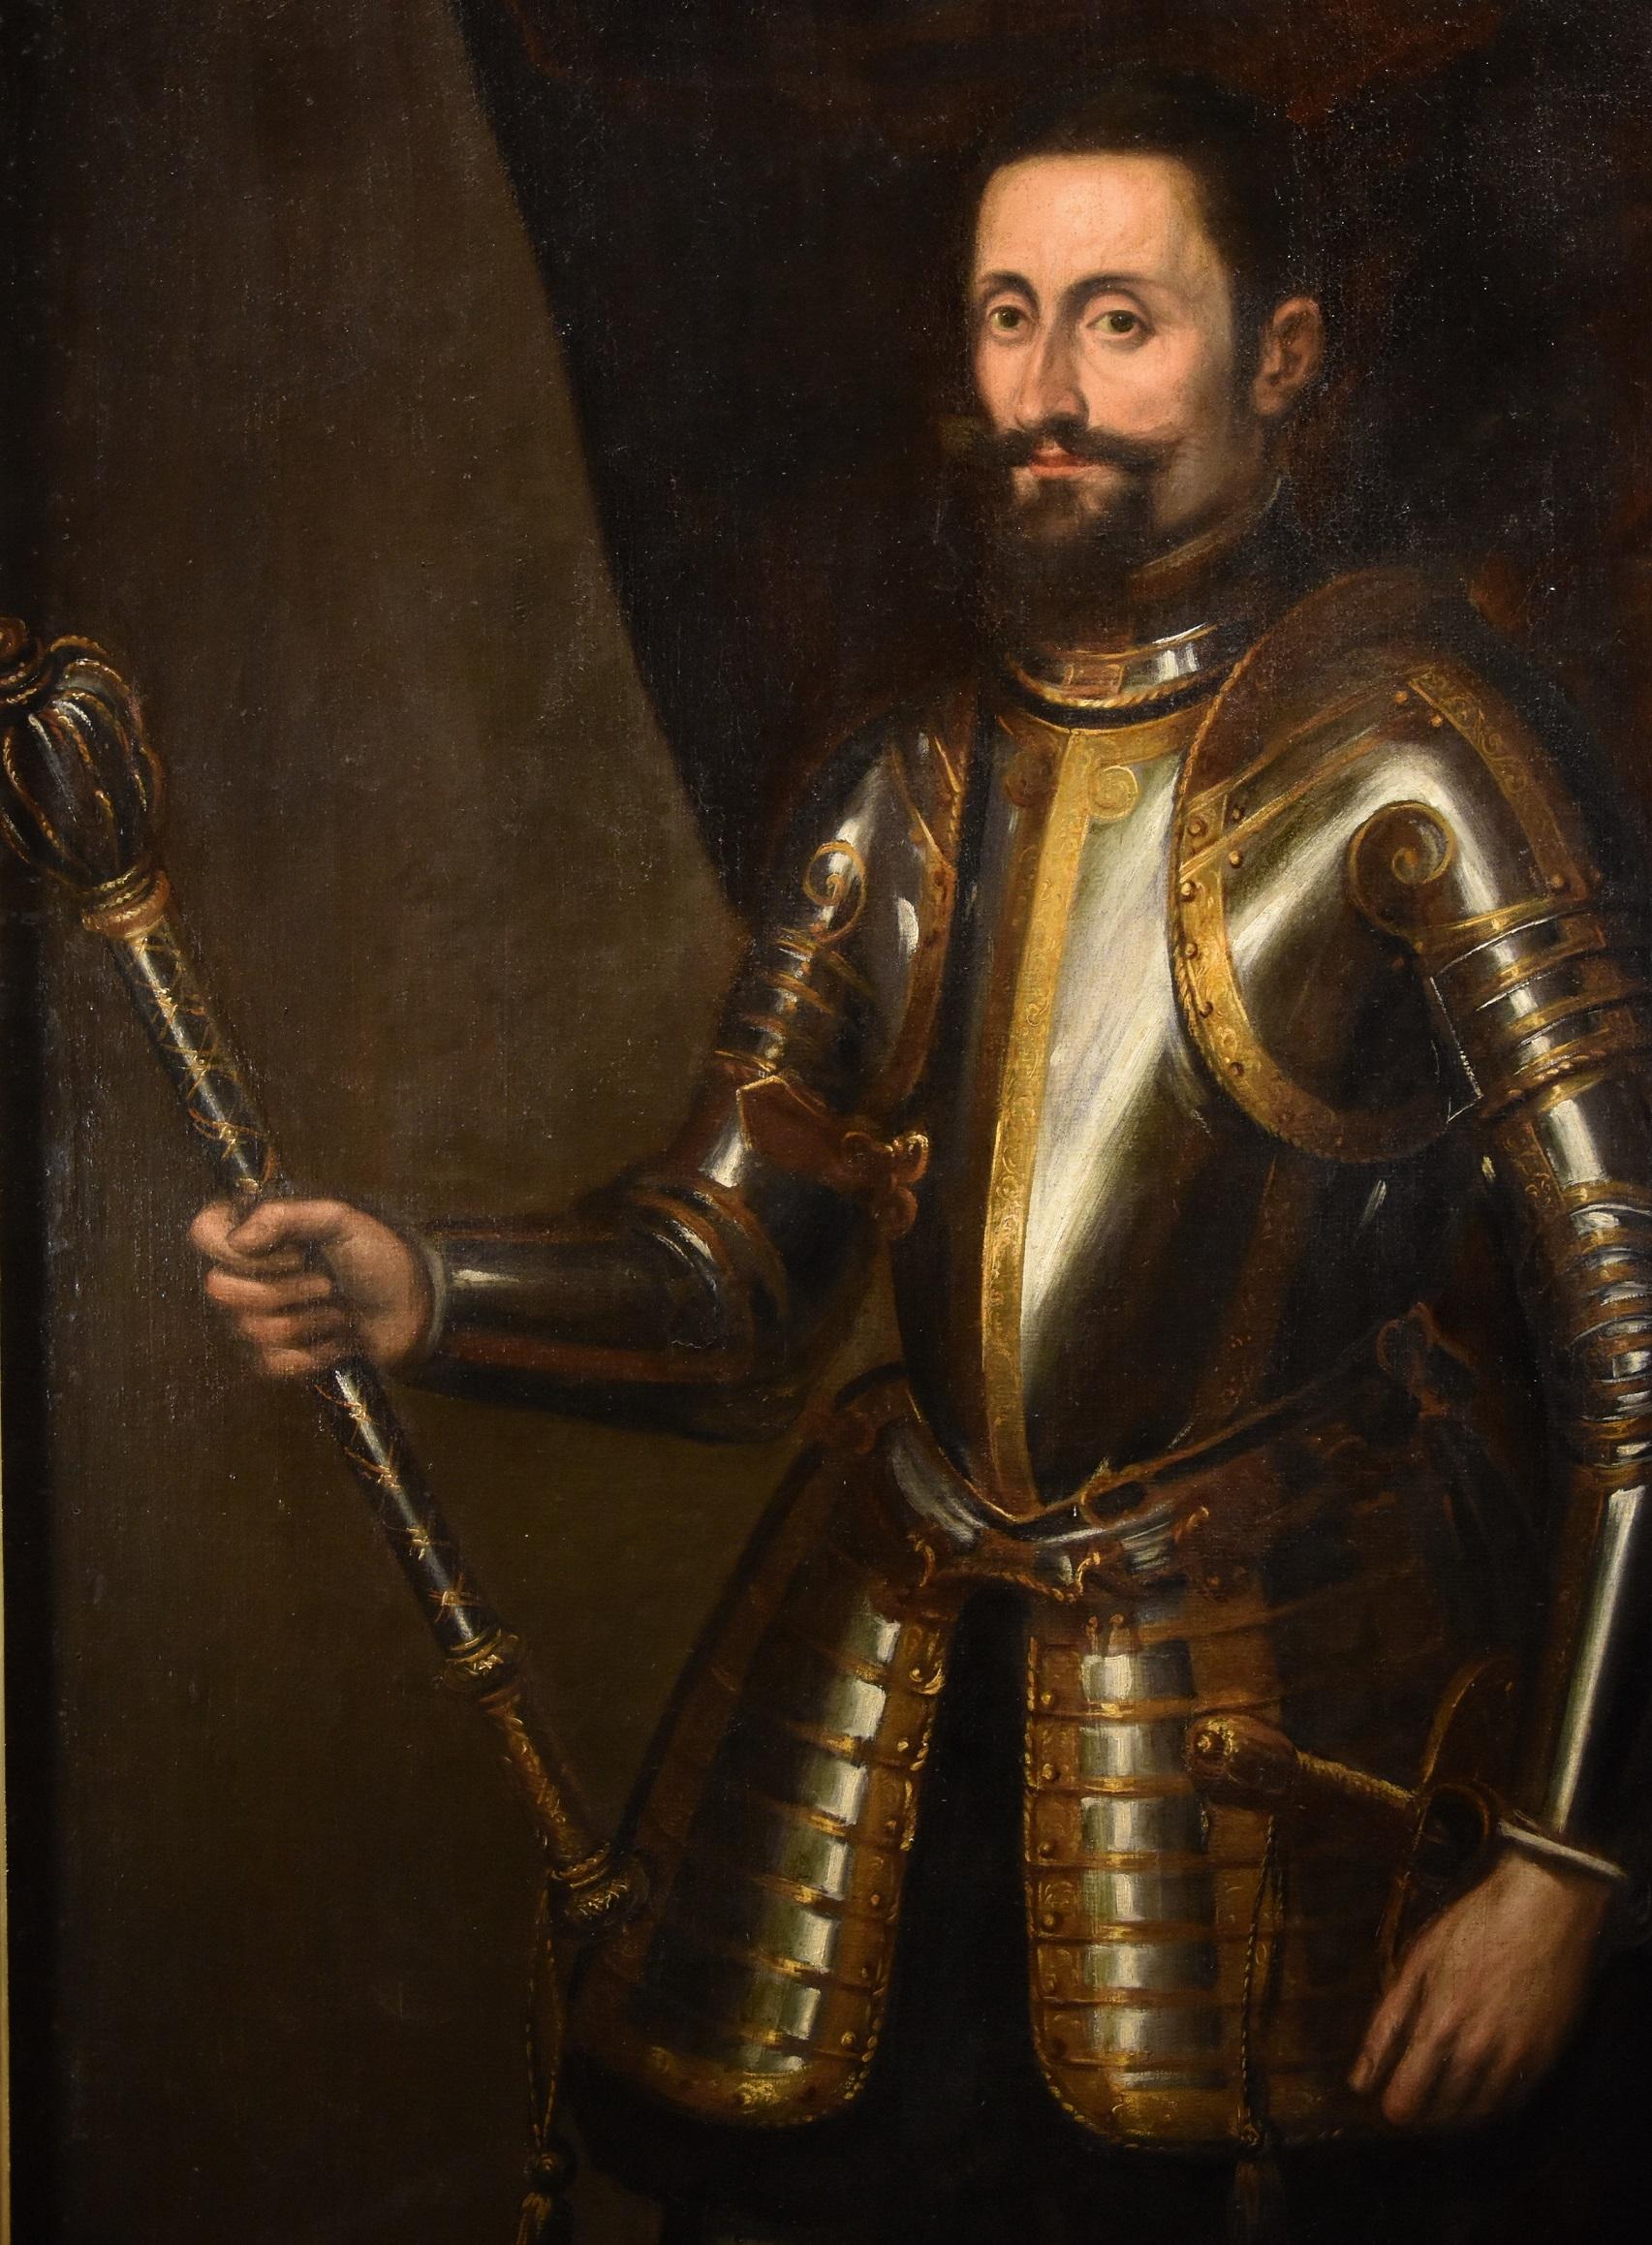 Titian painter of the late 16th century
Official portrait of a knight in armour (probably Charles V of Habsburg)

Oil on canvas
141 x 112 cm.
In antique frame 142 x 113 cm.

This fascinating posed manly portrait, in which the effigy of noble social